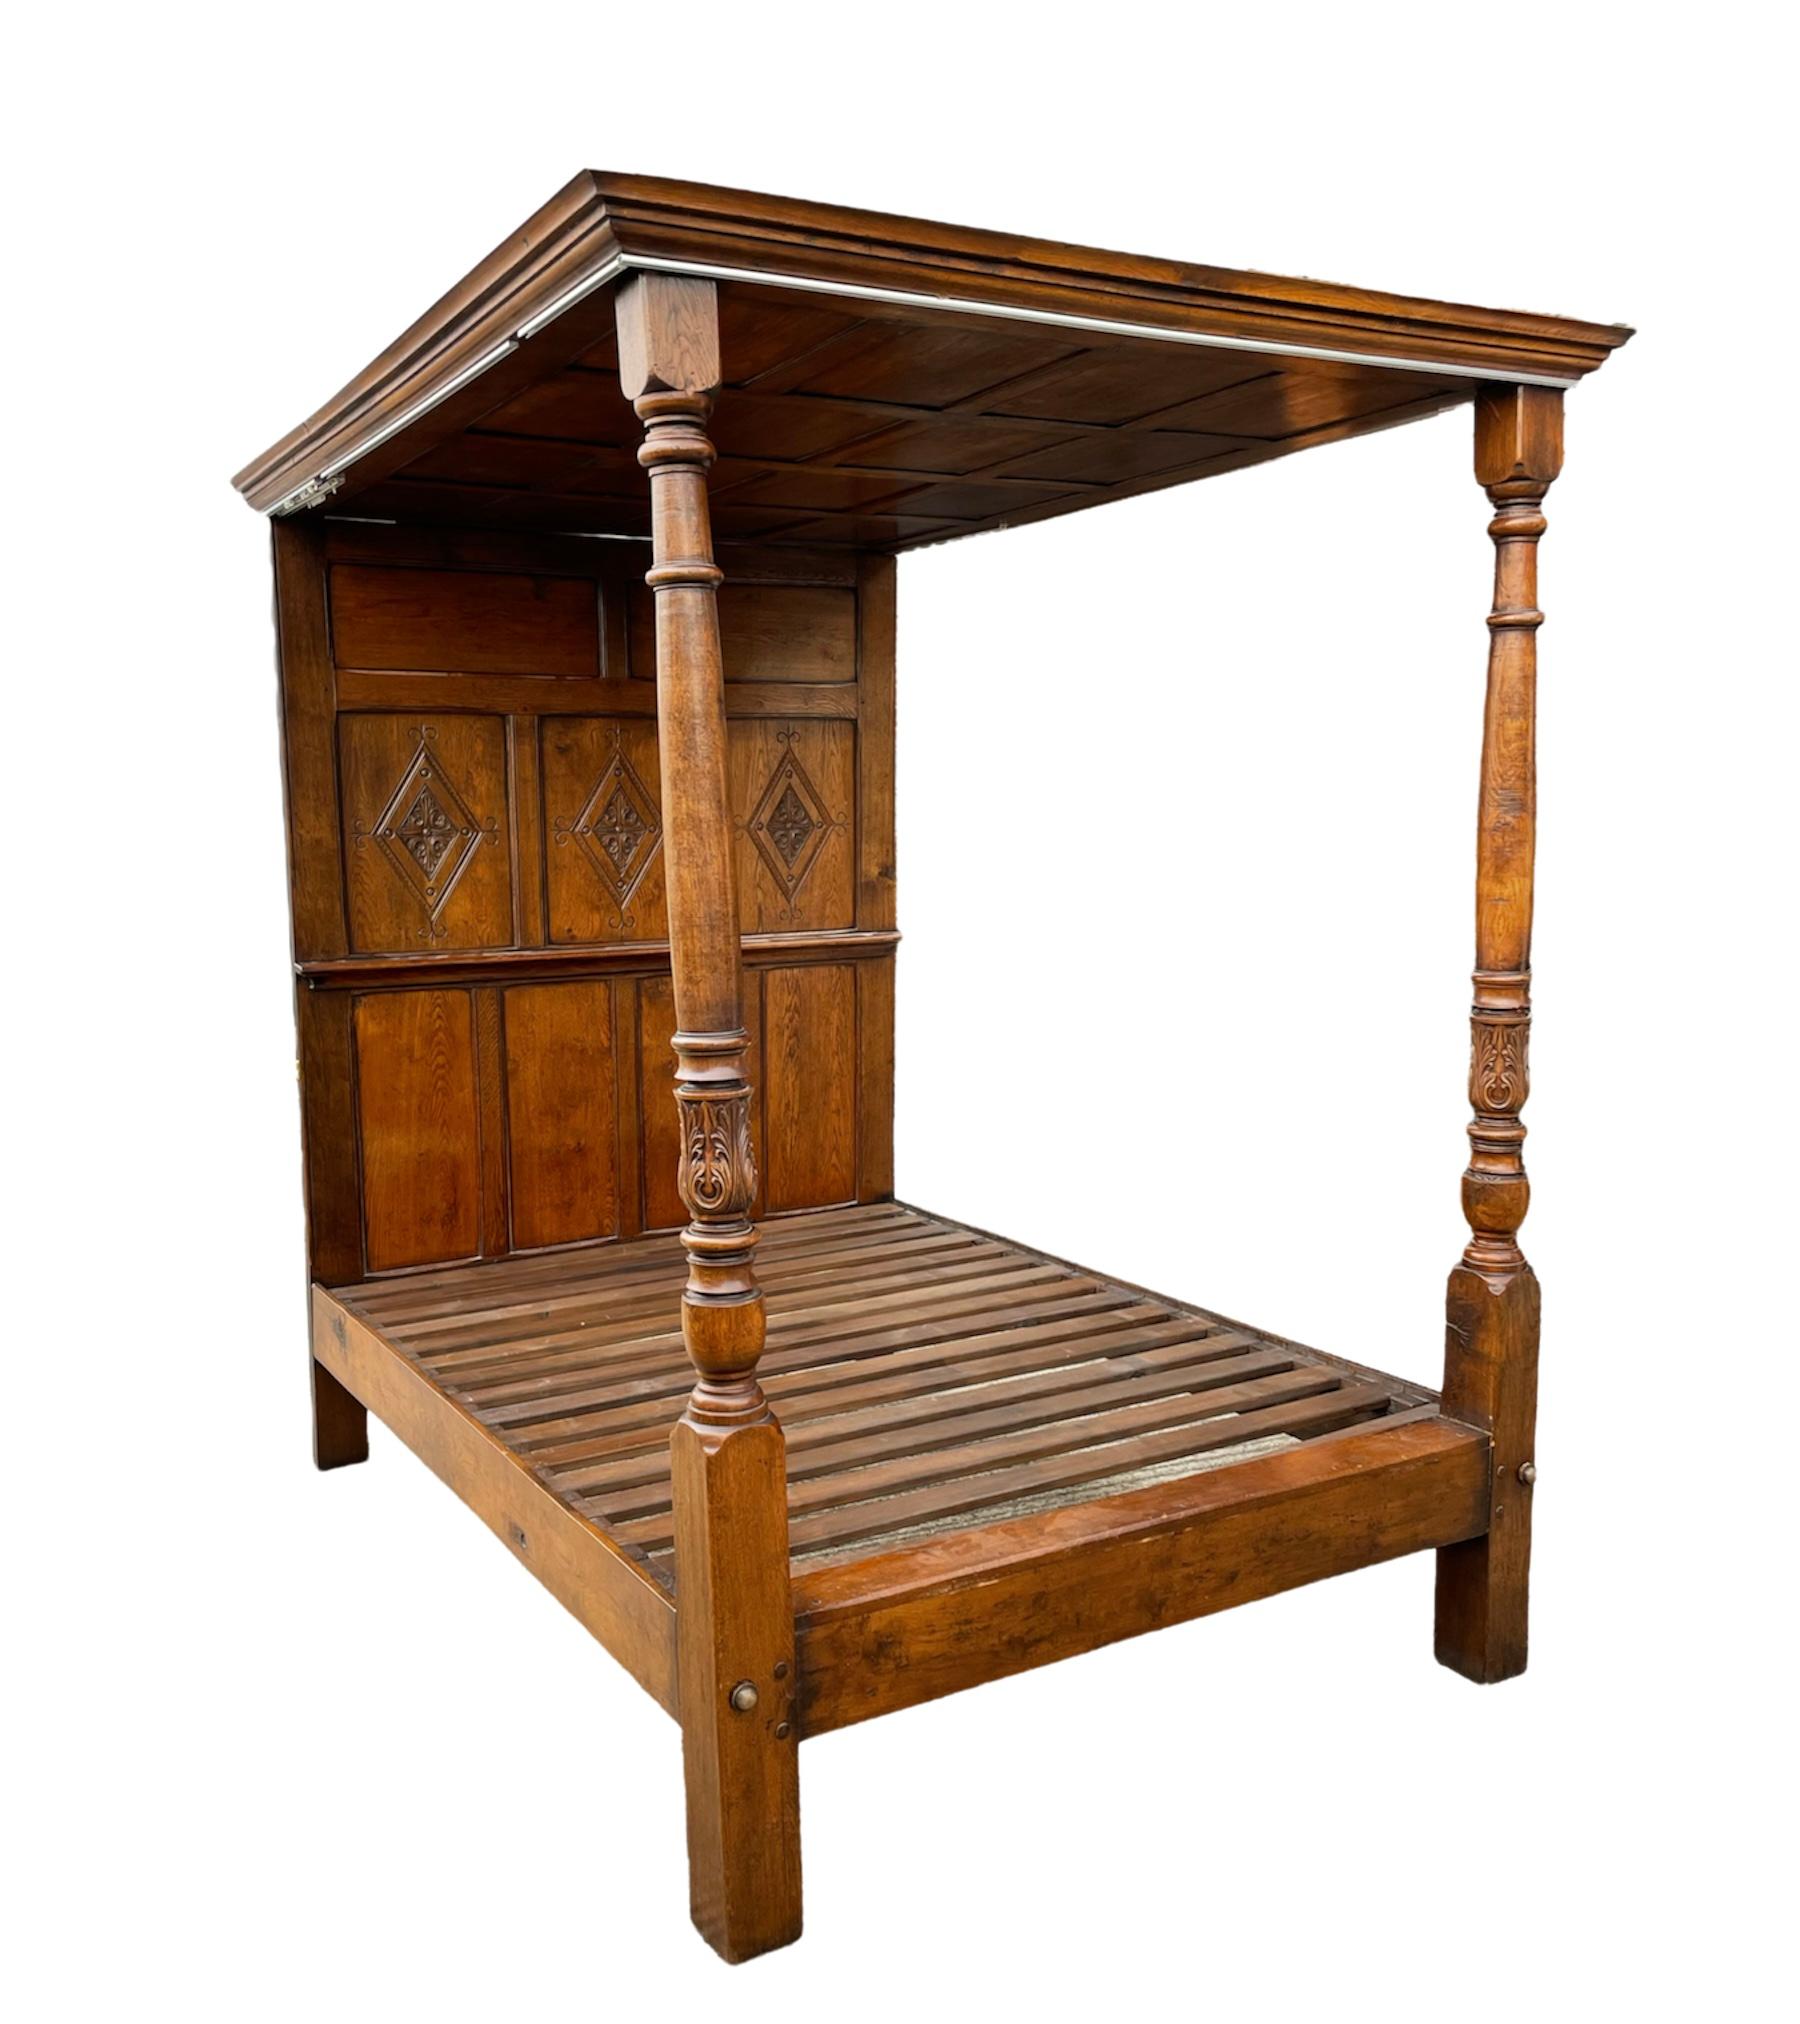 Fine quality carved oak four poster king size bed in the Jacobean style circa 1920 .
The bed is constructed of solid oak through out ,it has a fine lozenge carved panelled head board with a wonderful panelled oak canopy top with fine carved column